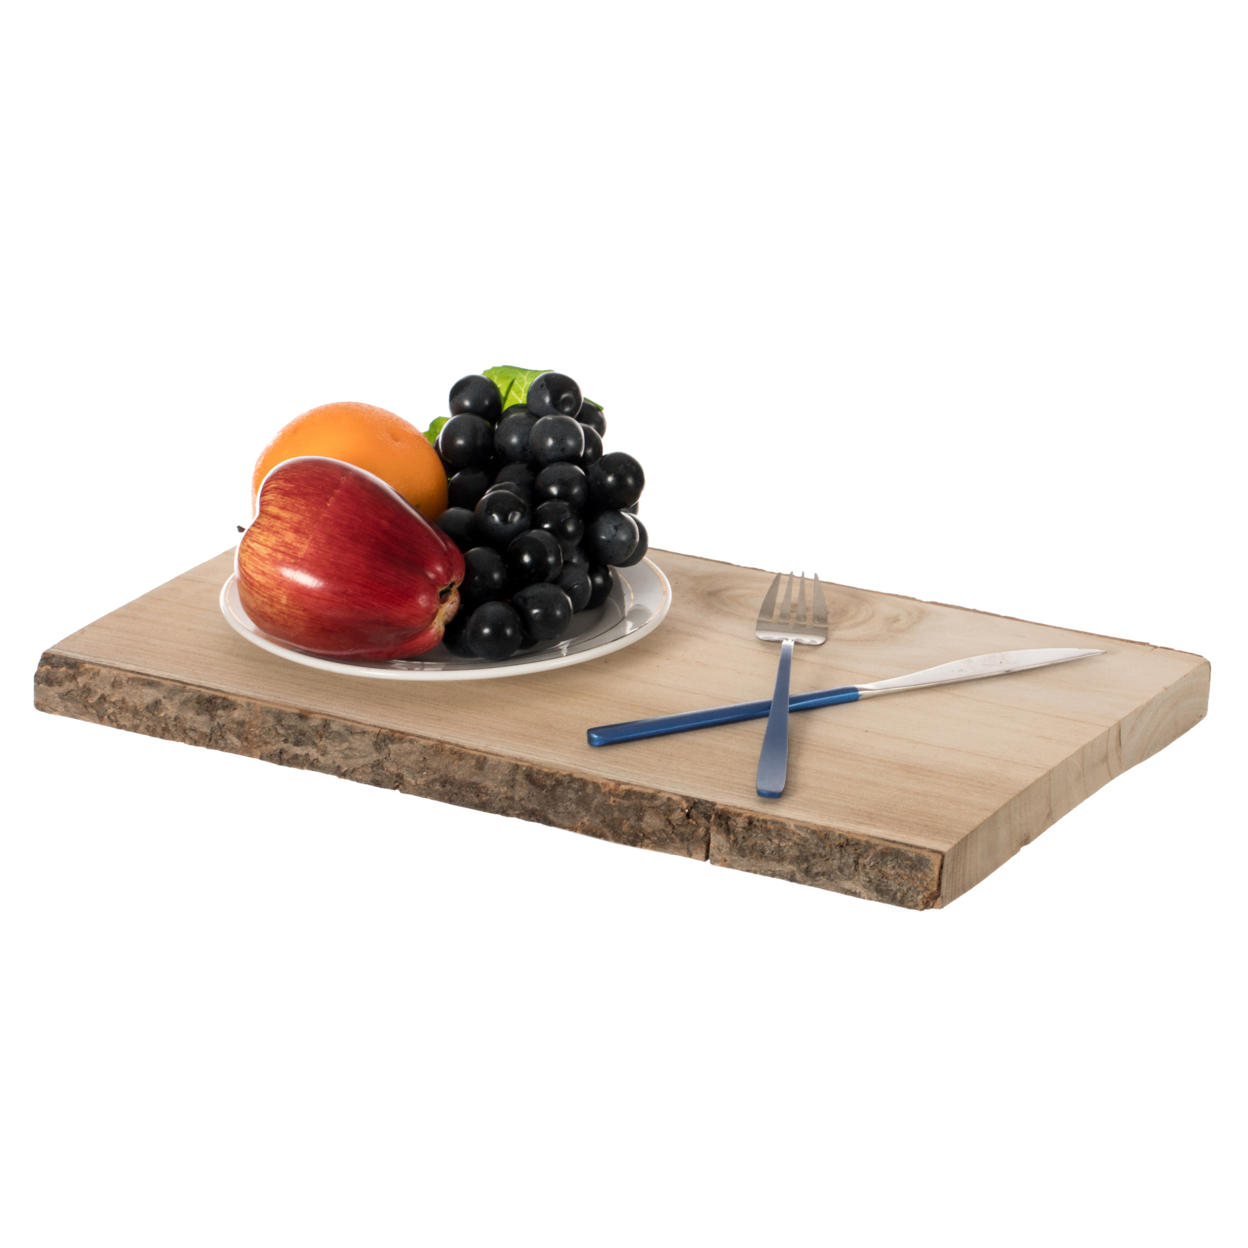 Rustic Natural Tree Log Wooden Rectangular Shape Serving Tray Cutting Board - 16